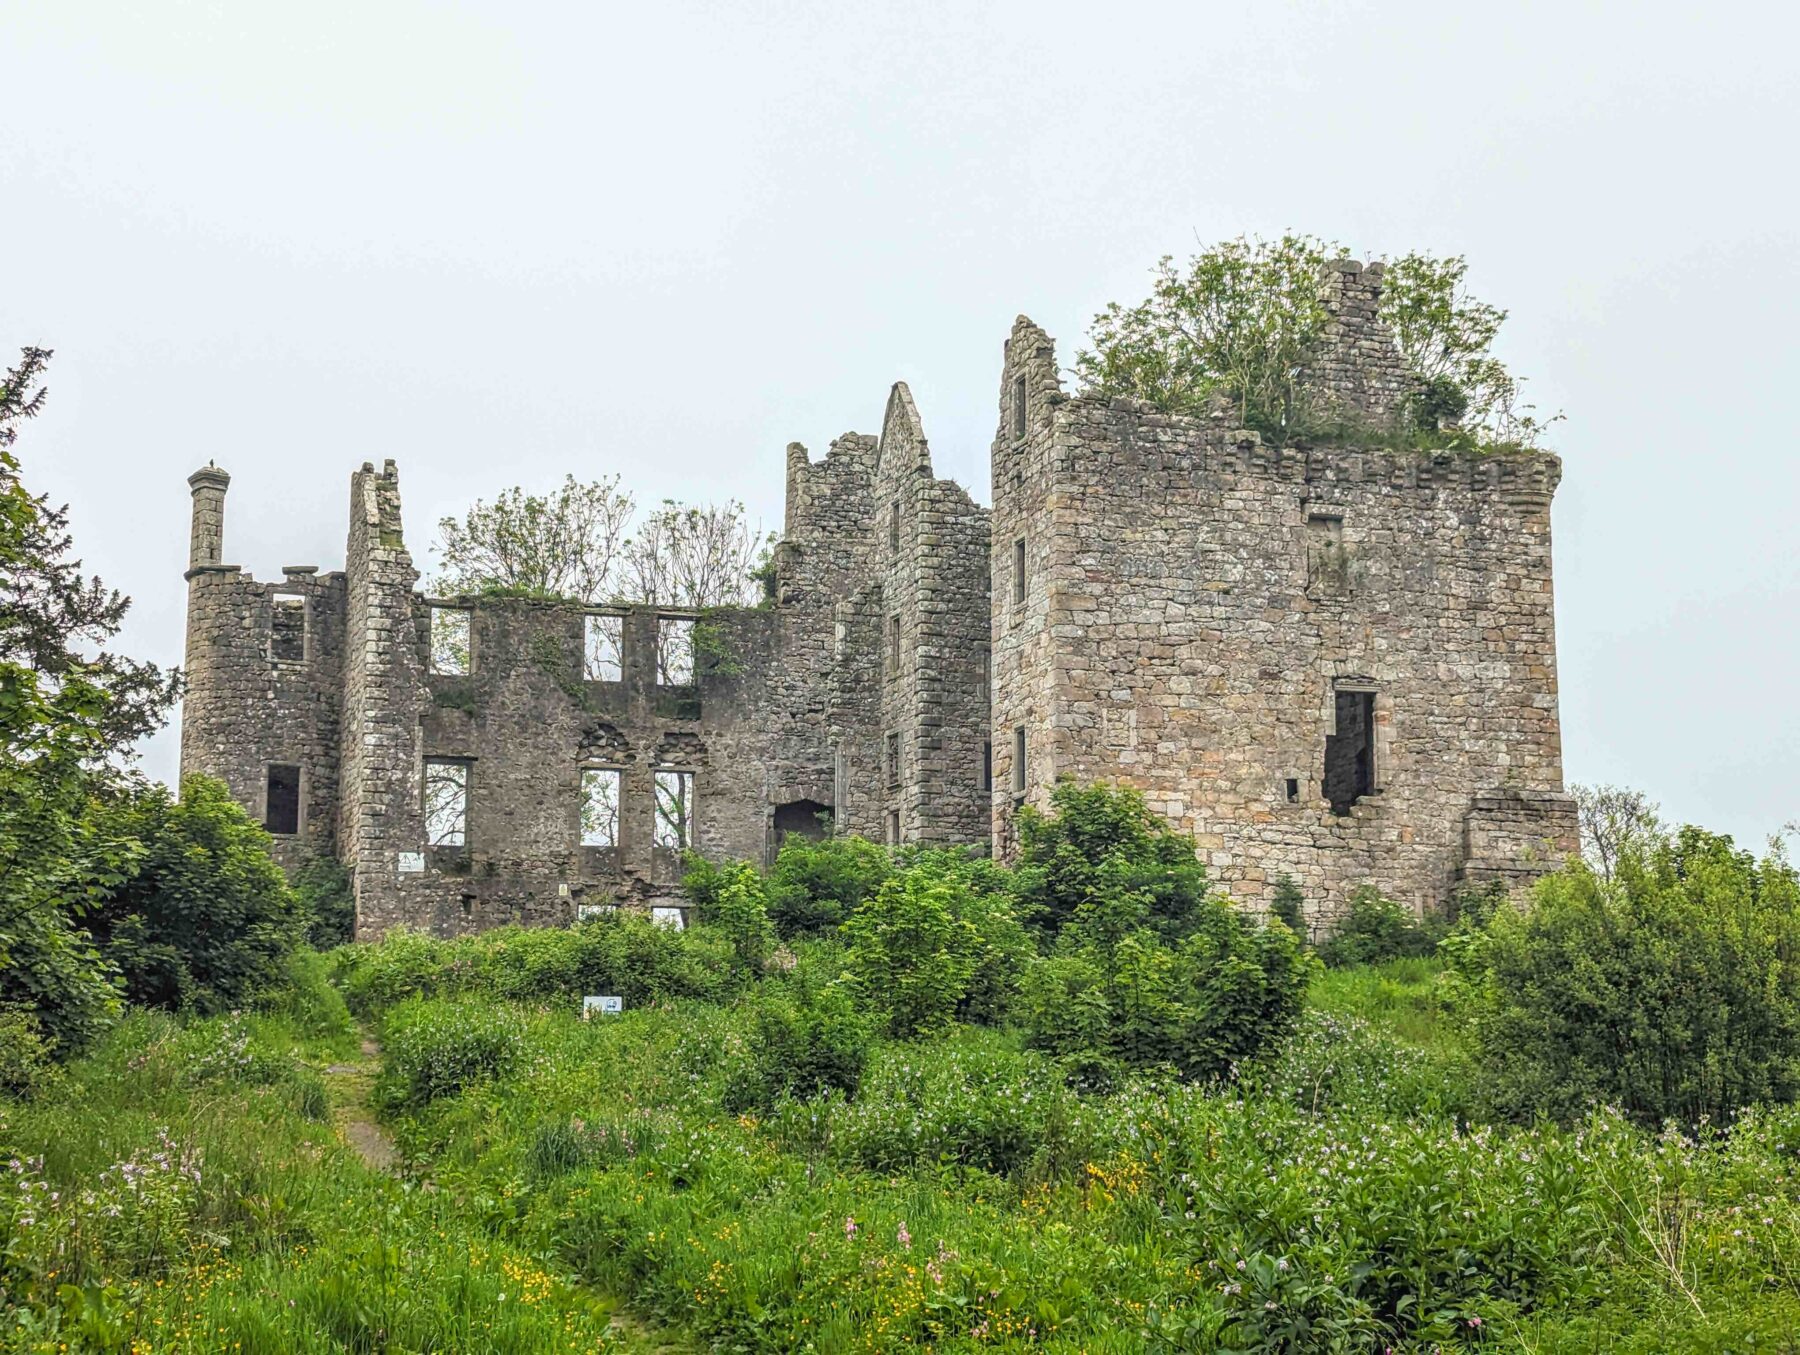 Ruinous stone castle surrounded by overgrown vegetation